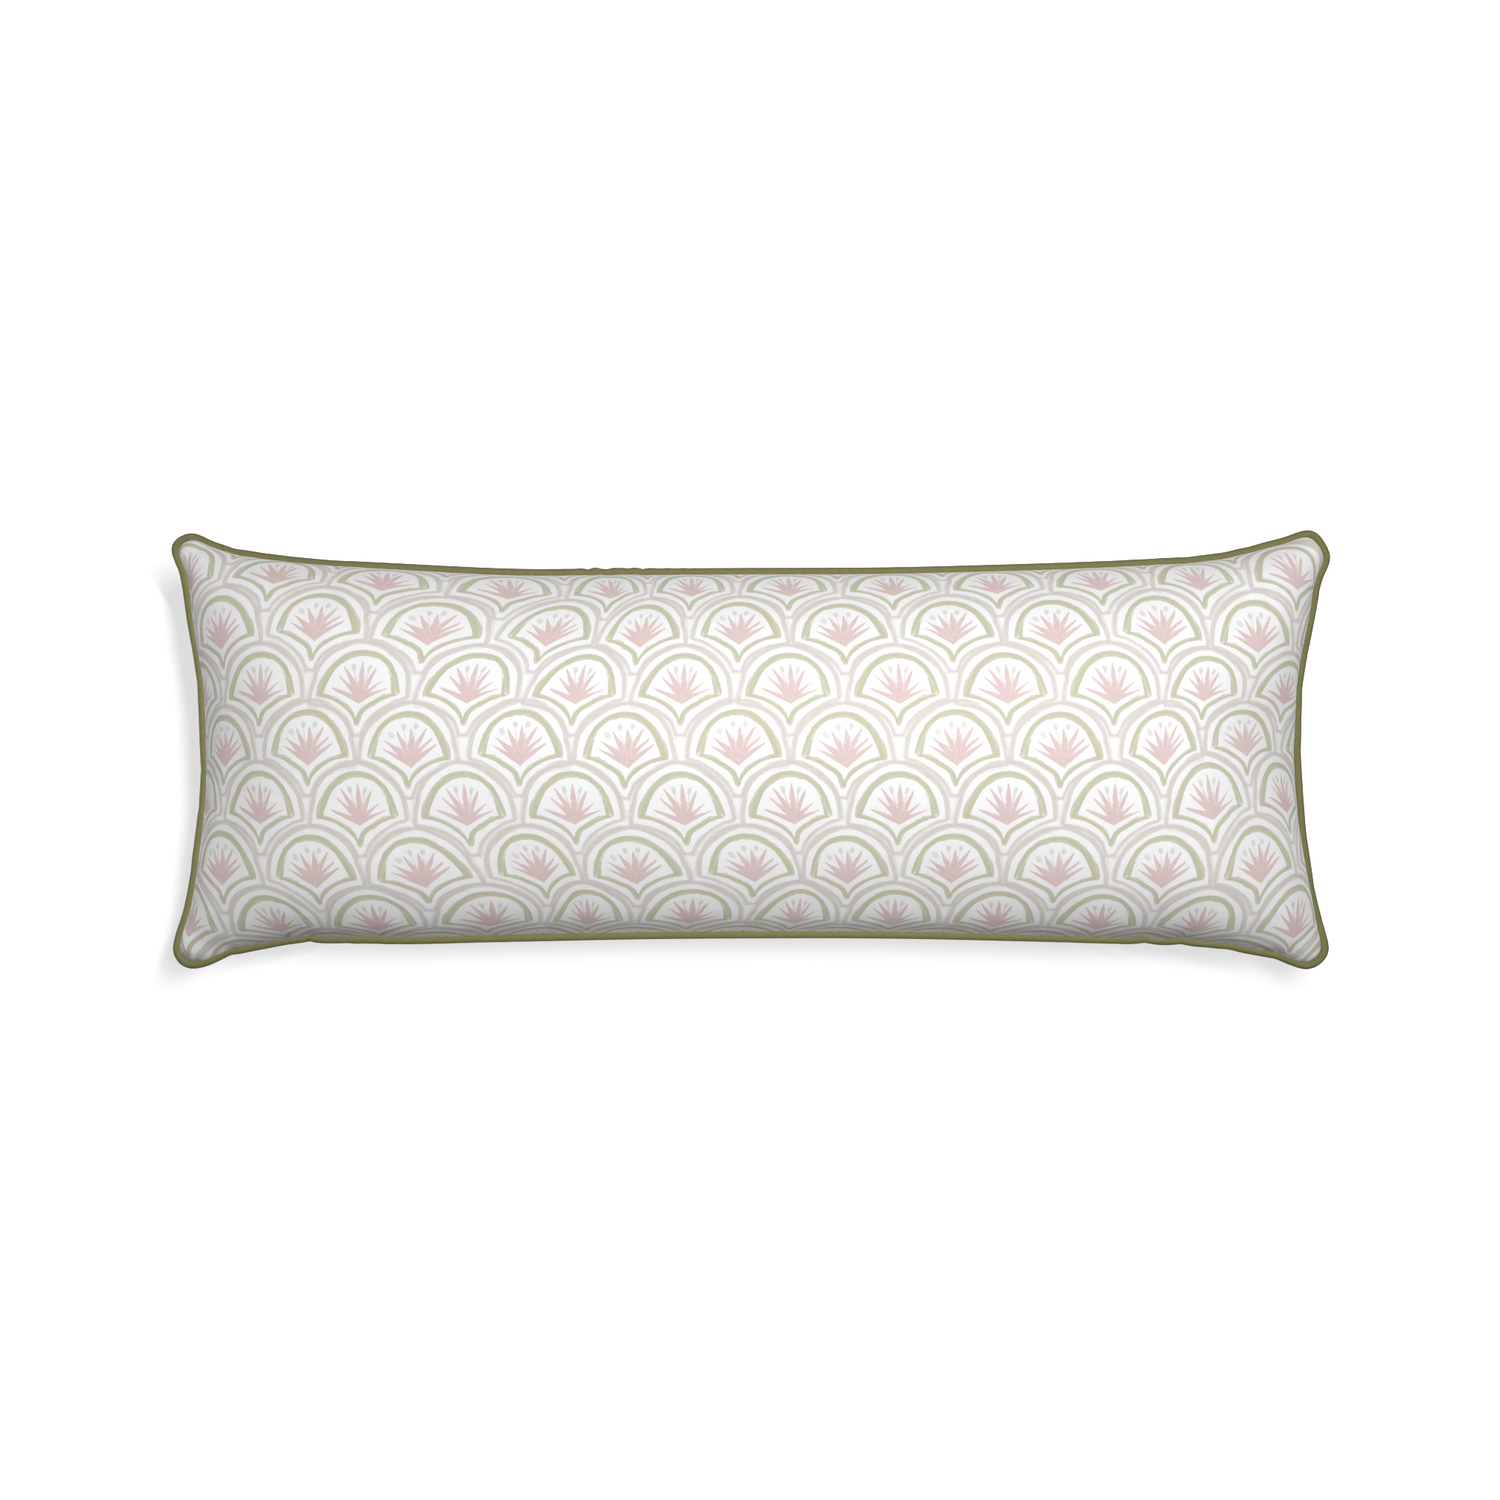 Xl-lumbar thatcher rose custom pillow with moss piping on white background